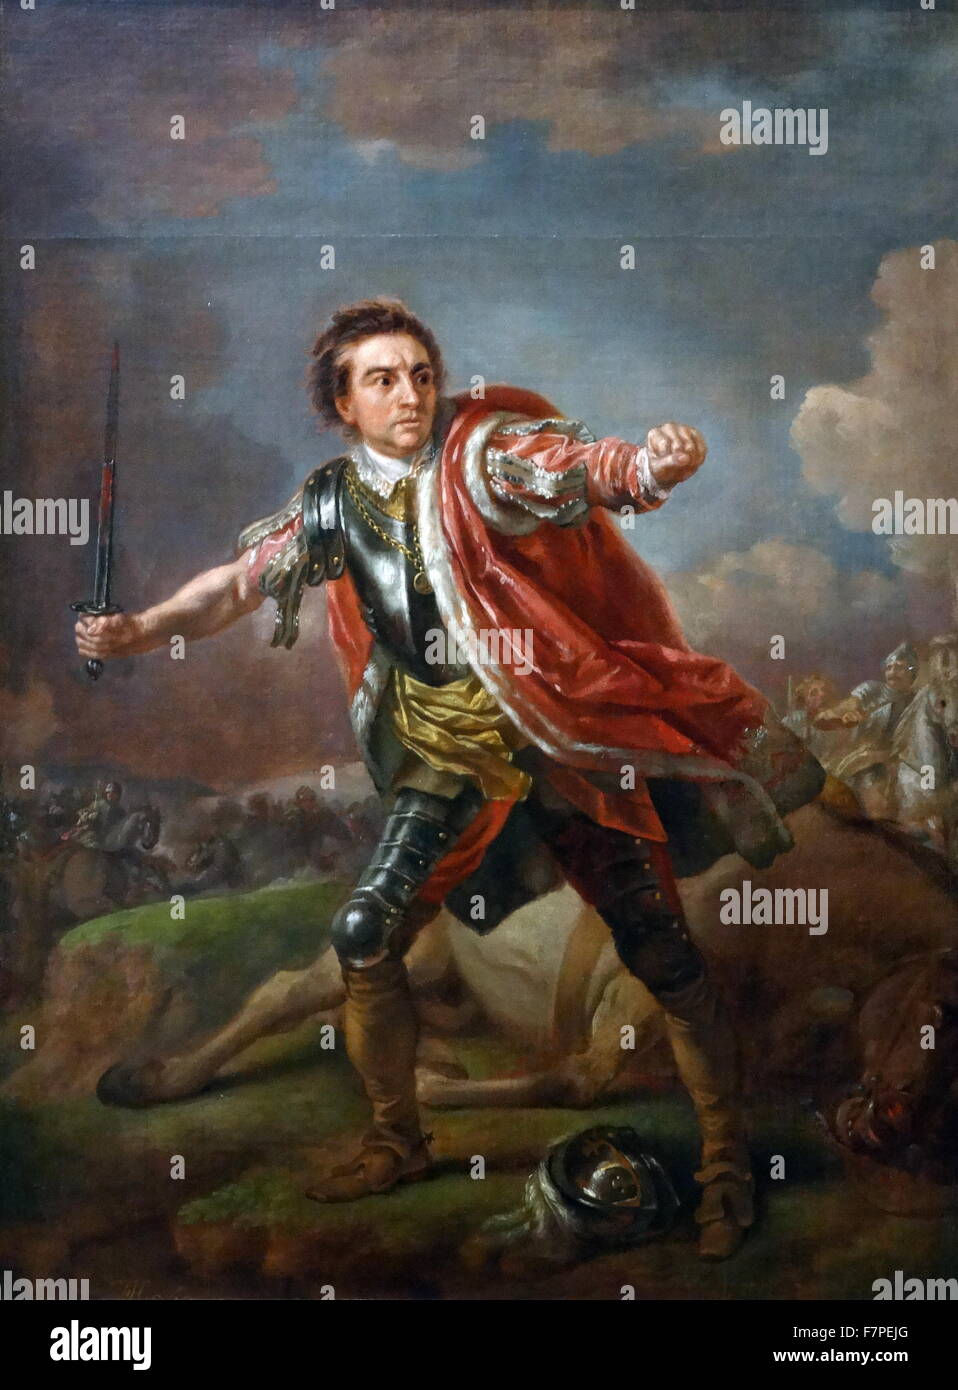 David Garrick in 'Richard III’ by William Shakespeare. 1760 Oil on canvas, by Francis Hayman (about 1708-1776) Stock Photo